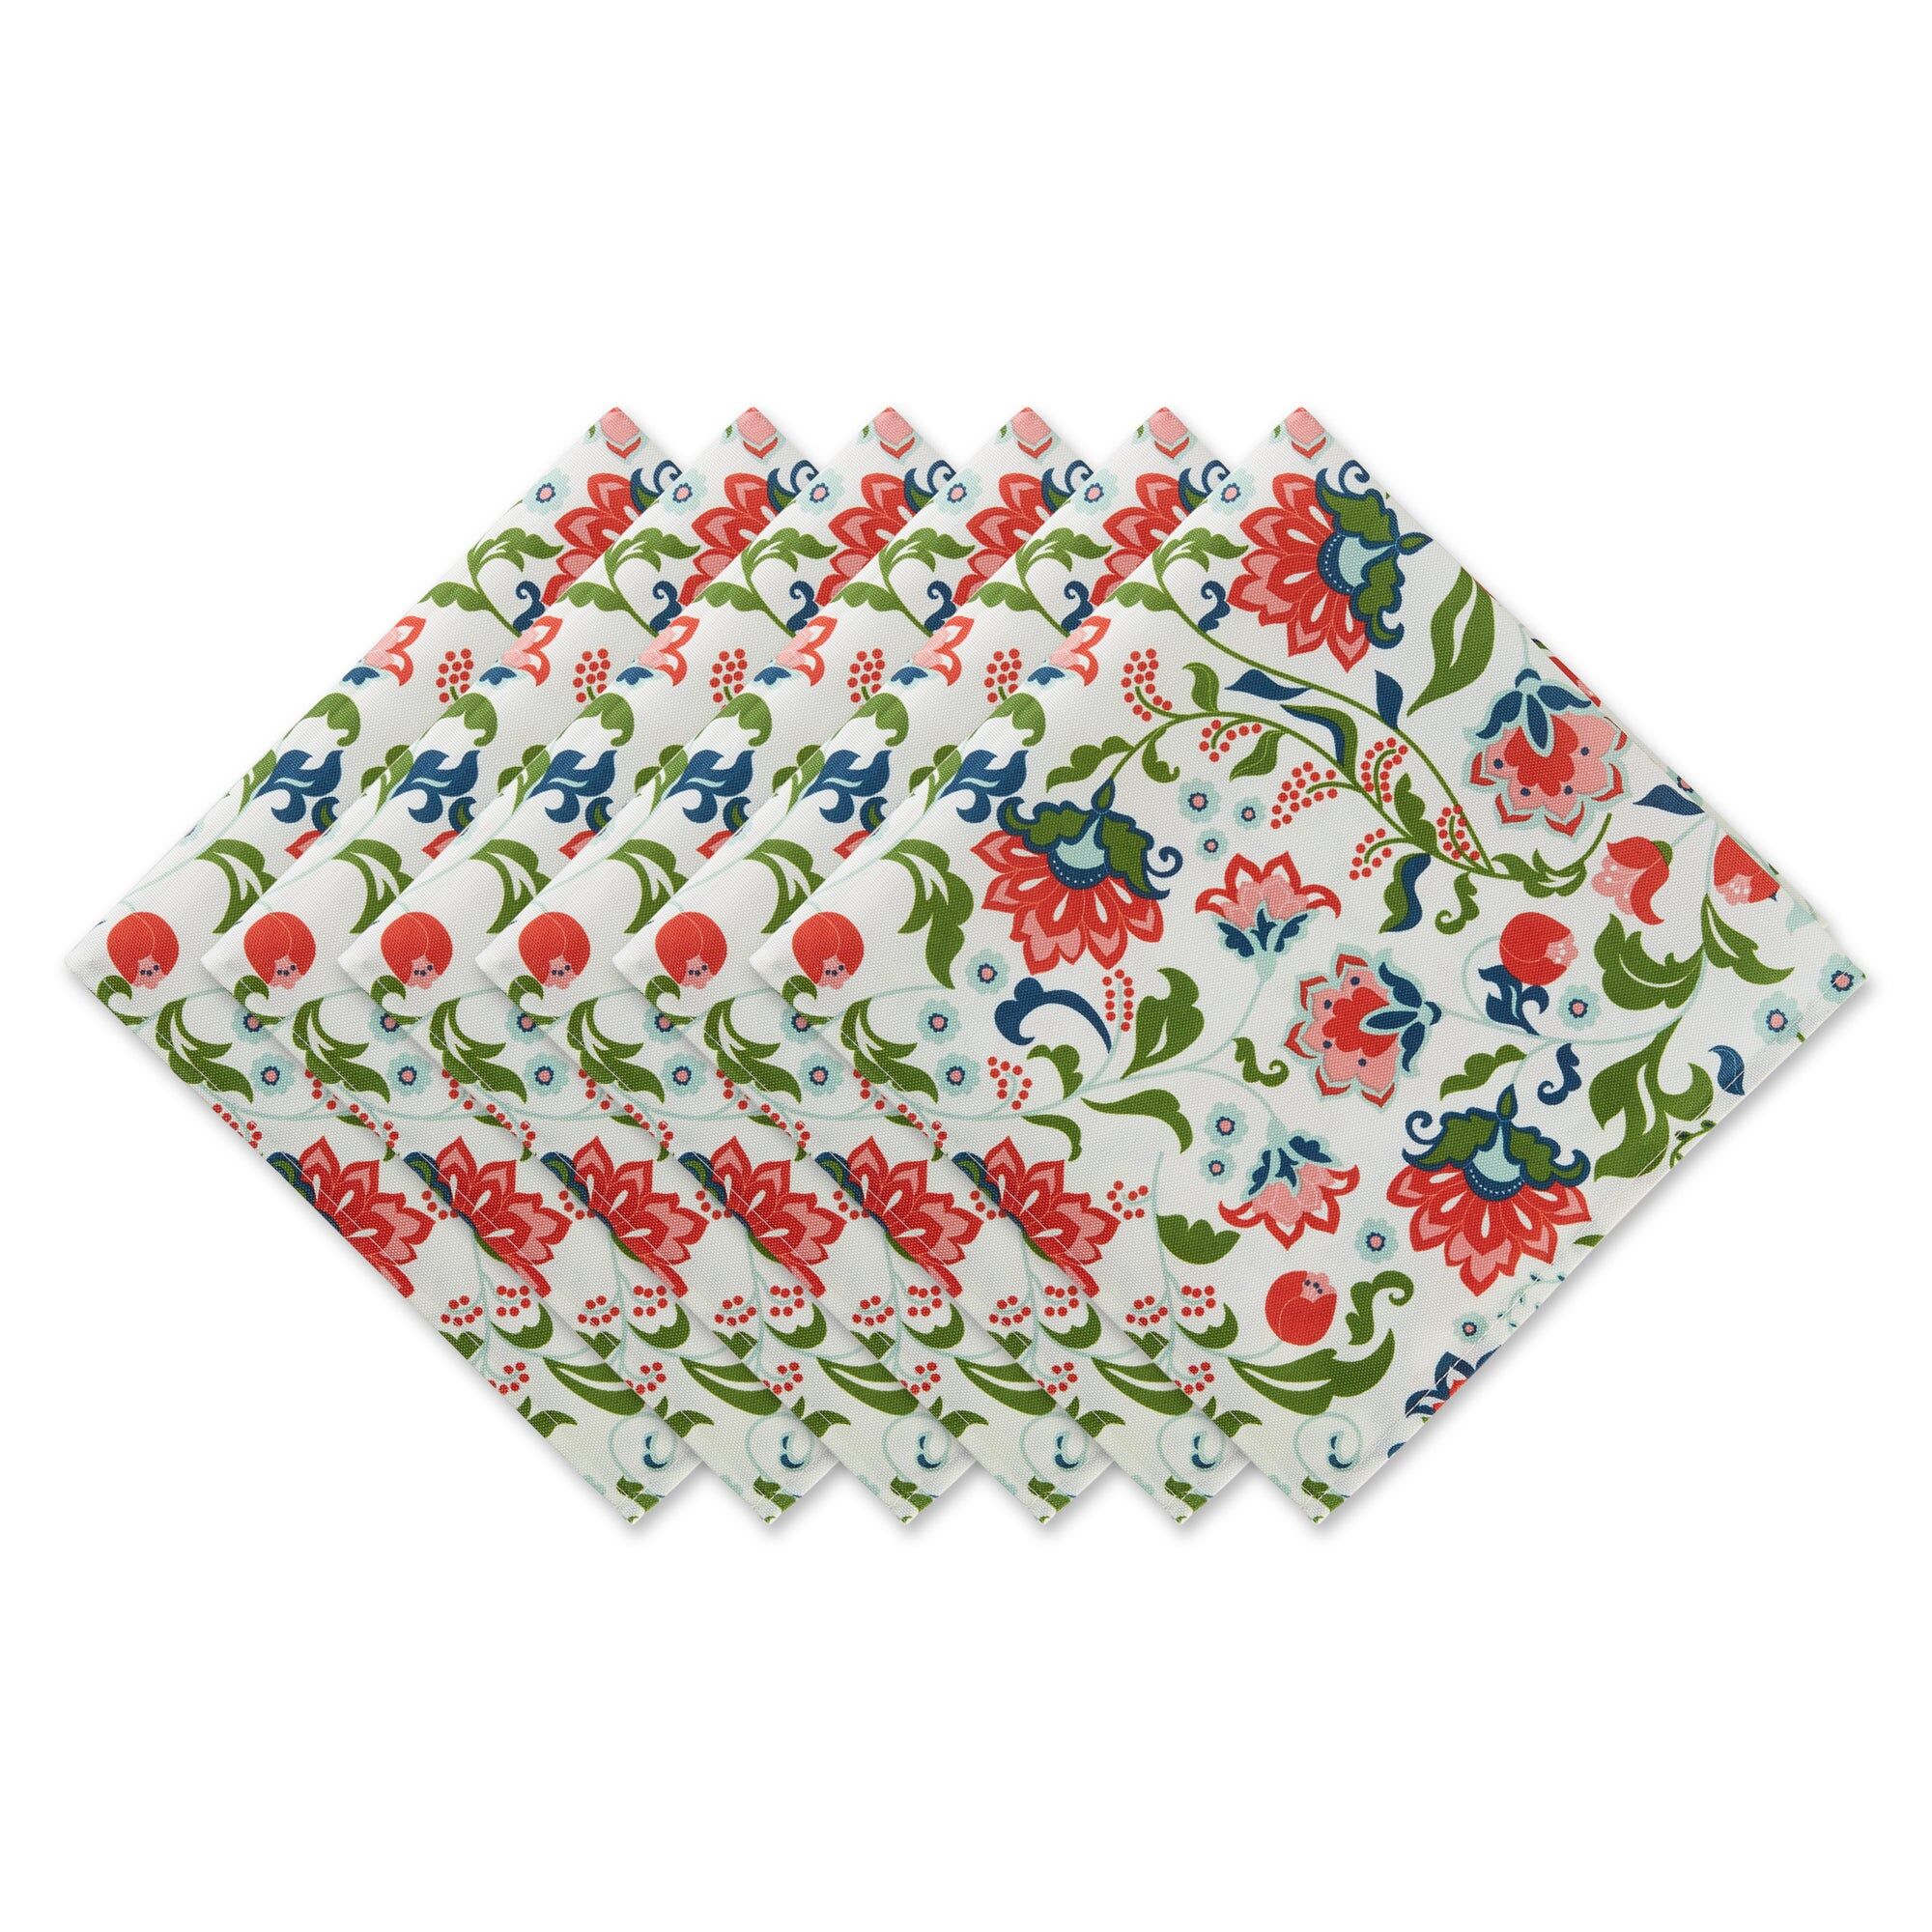 DII Outdoor Garden Floral Napkin (Set of 6) - multi - Size: 20x20 inches